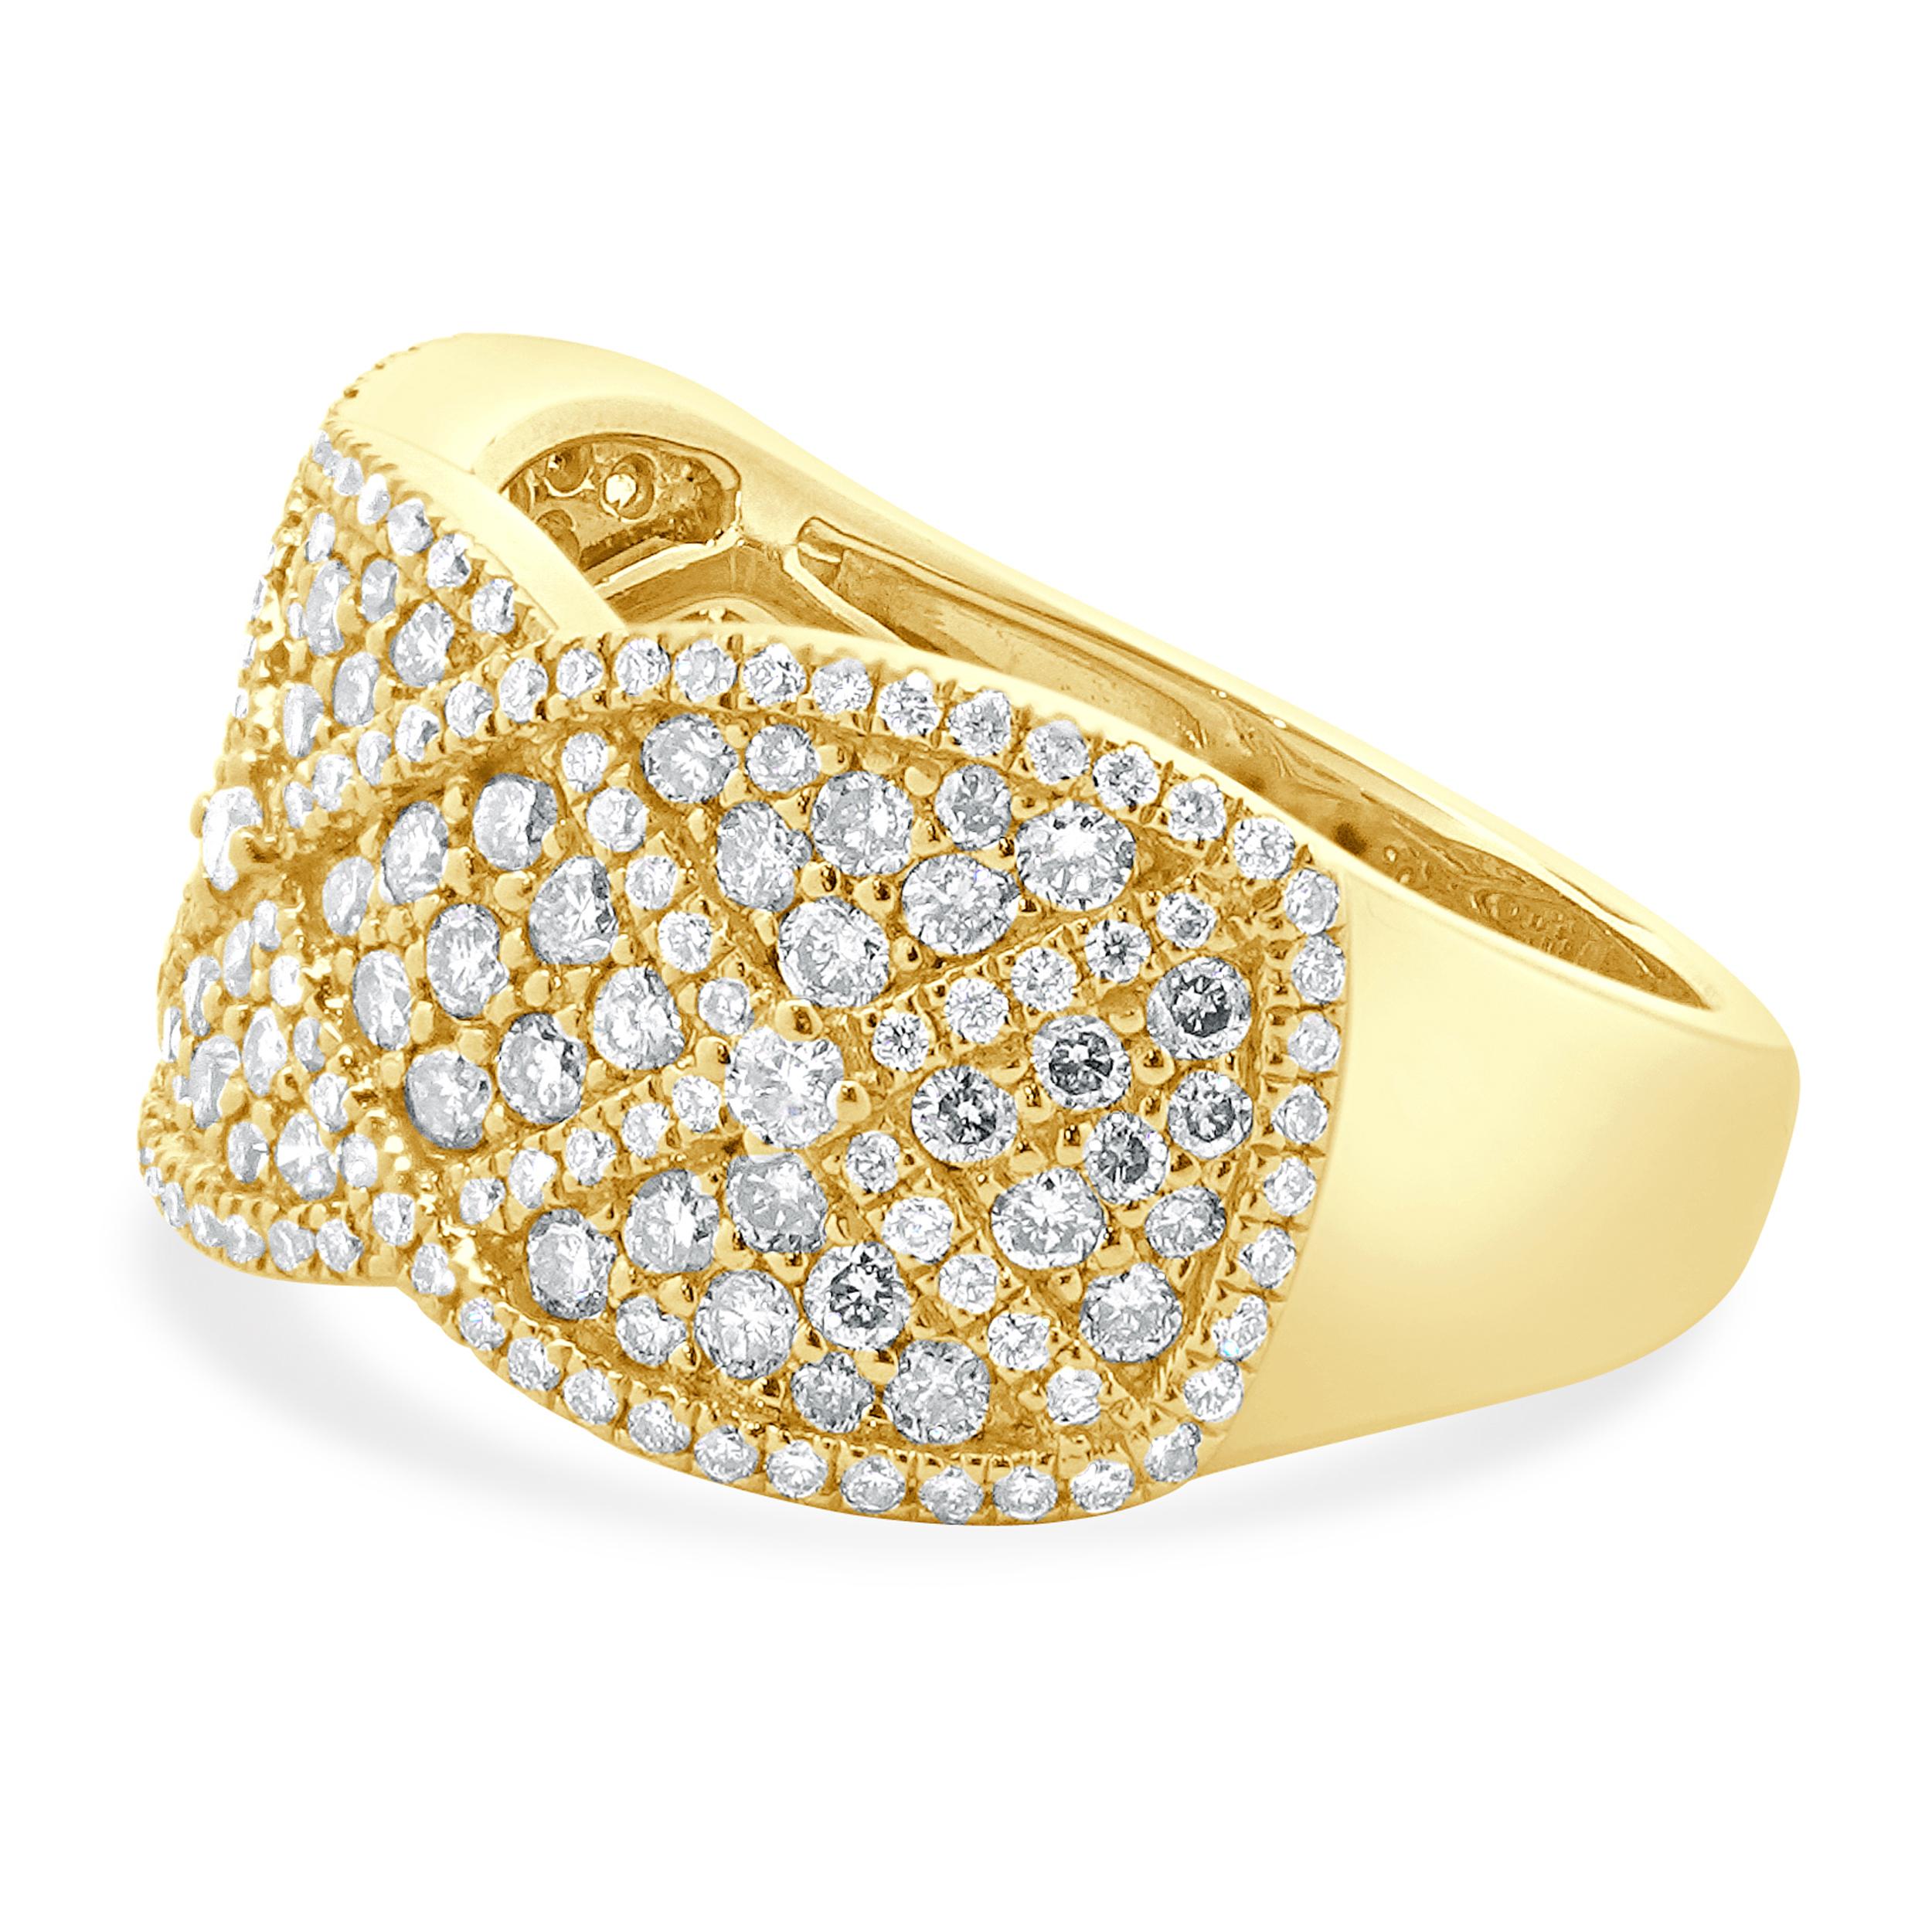 Designer: custom
Material: 14K yellow gold
Diamond: 144 round brilliant cut = 0.75cttw
Color: G
Clarity: VS1-2
Diamond: 82 round brilliant cut = 0.82cttw
Color: light yellow
Clarity: SI1-2
Ring size: 6 (please allow two additional shipping days for